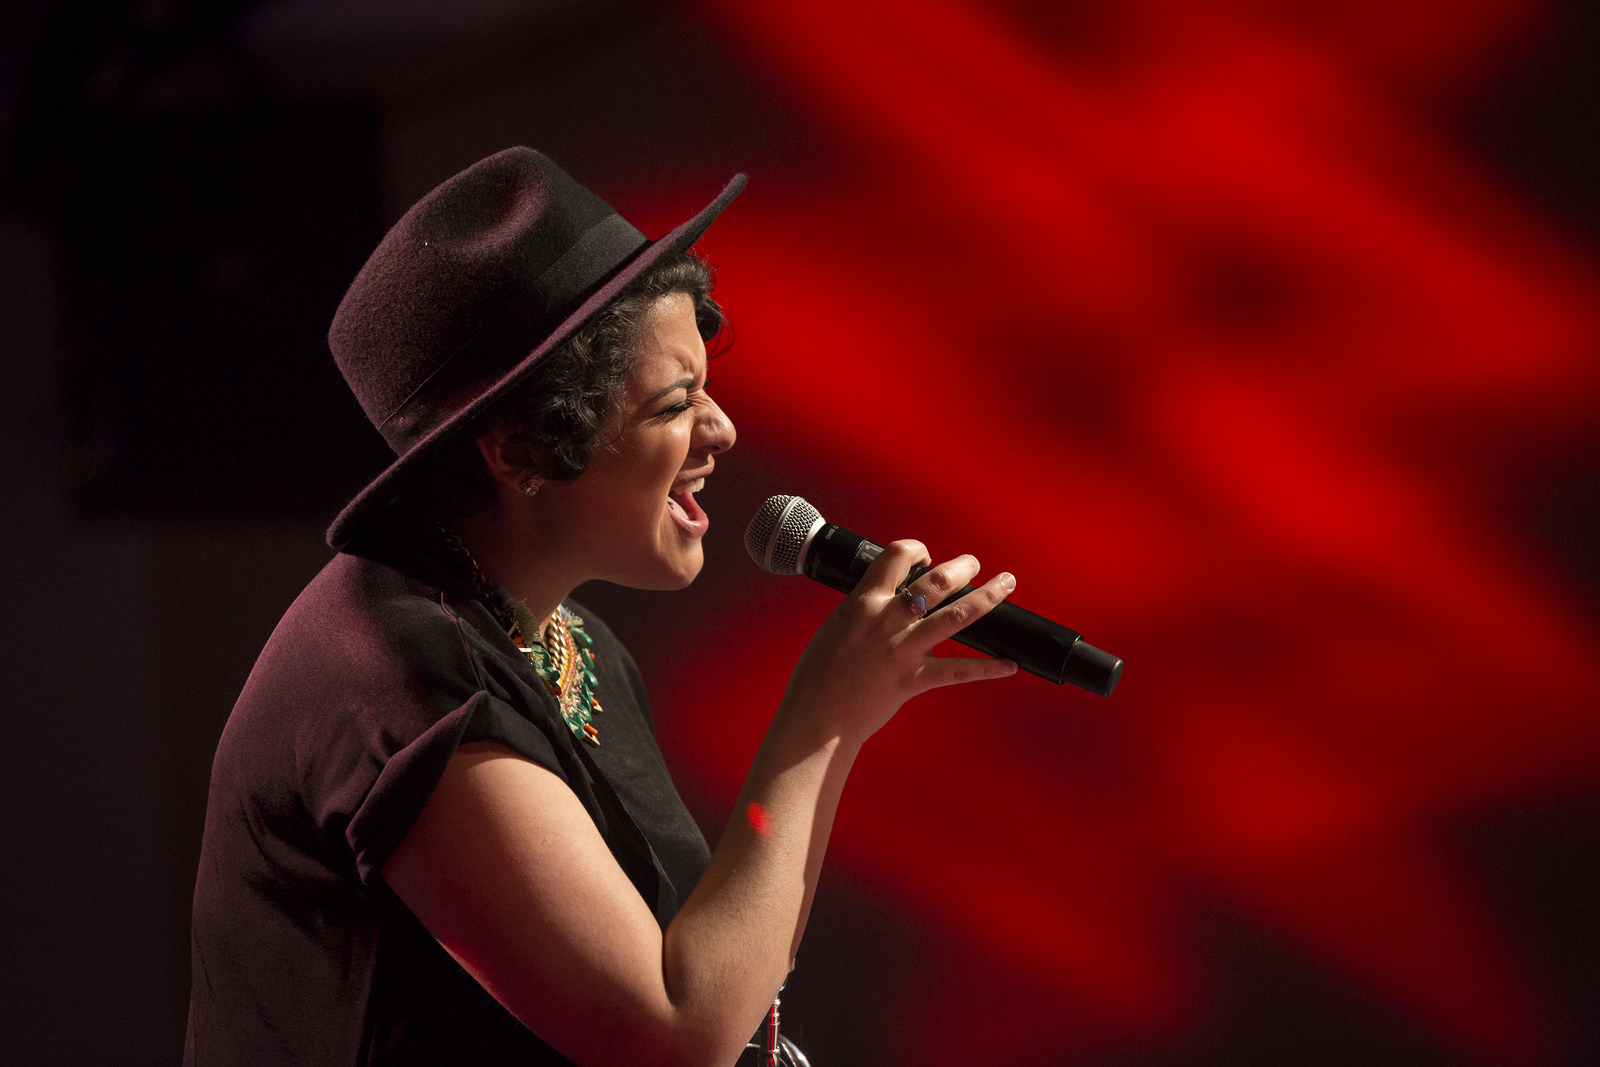 Linda Briceño shared the story of how she went from economics student to musician during Session 1 of TEDWomen 2015, before  bringing the room alive with her trumpet work and vocals. Photo: Marla Aufmuth/TED